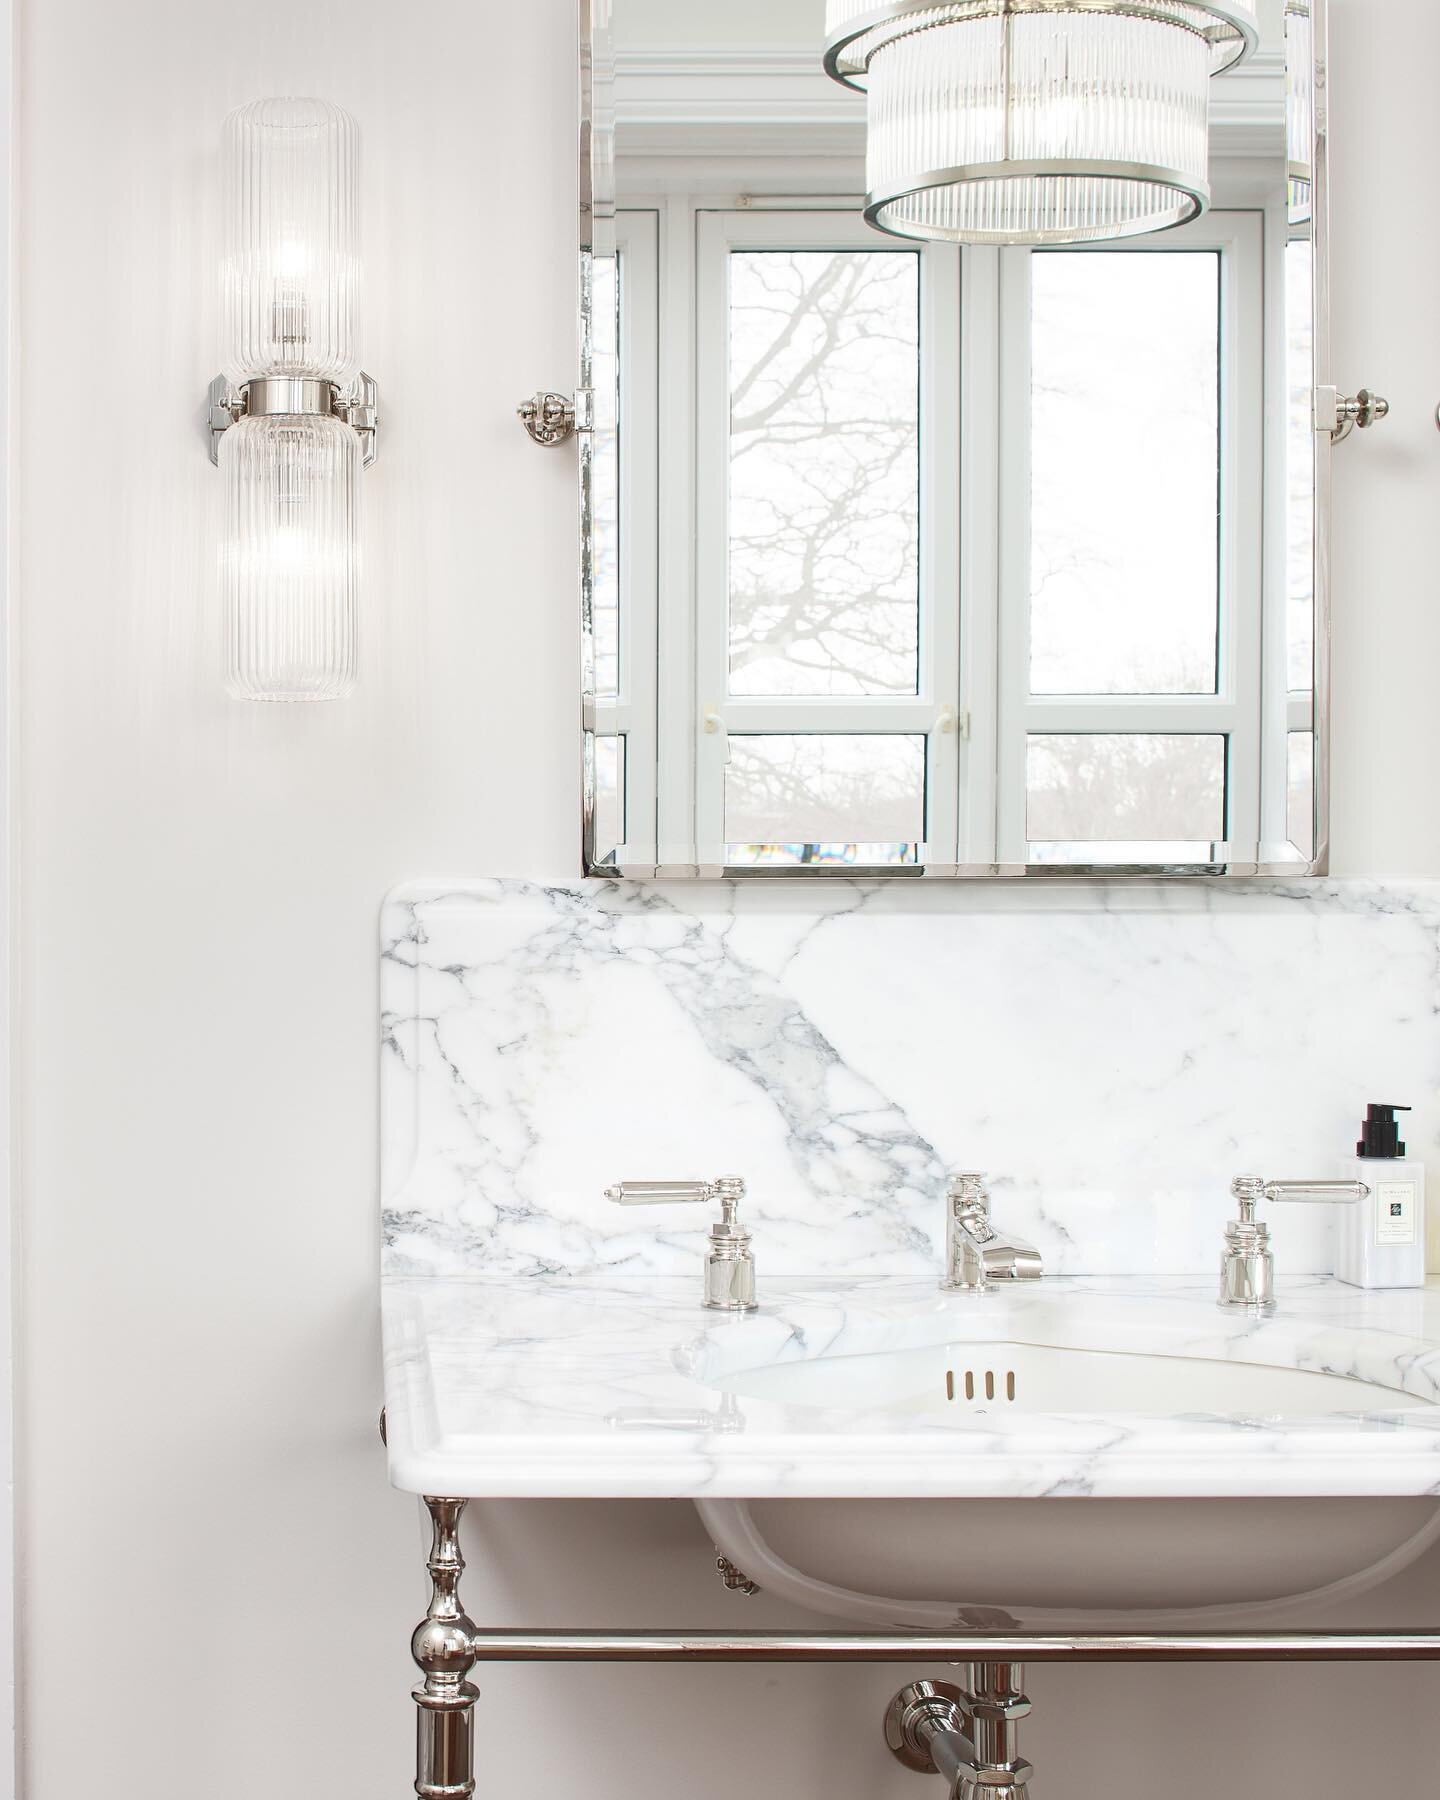 We complete the @drummonds_bathrooms Double Lowther Vanity Basin Suite with the addition of Drummonds&rsquo; very own mirrors and fluted lighting in this Aberdeen bathroom.